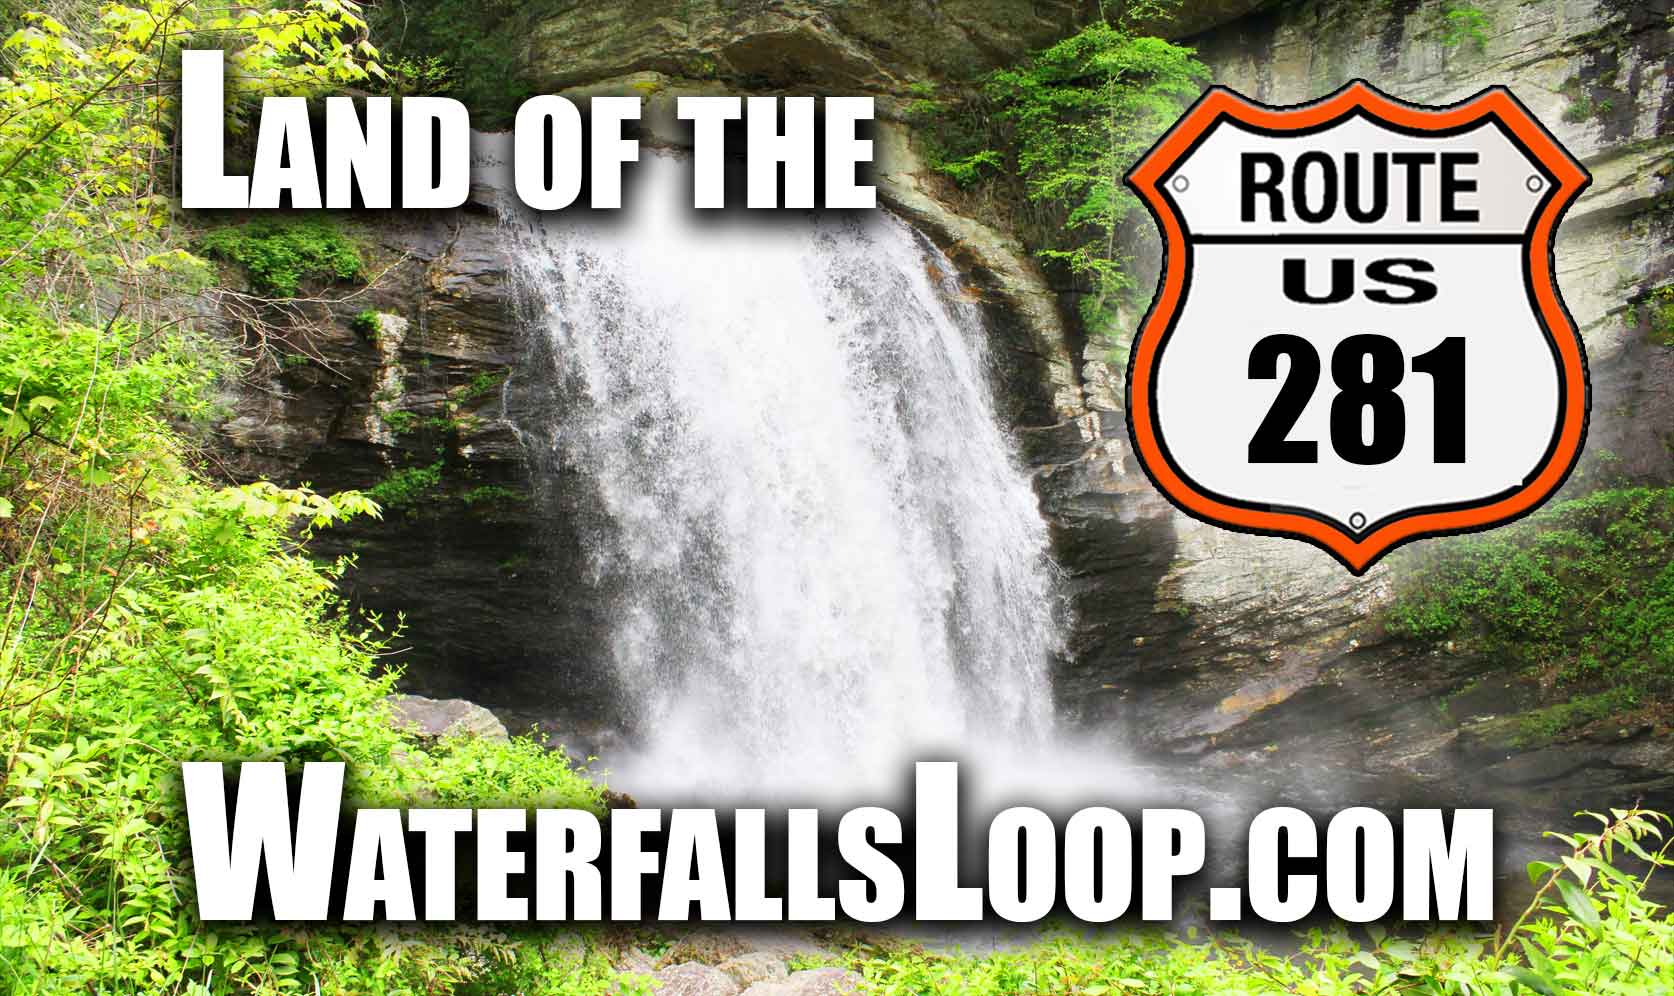 Land of the Waterfalls Motorcycle Ride